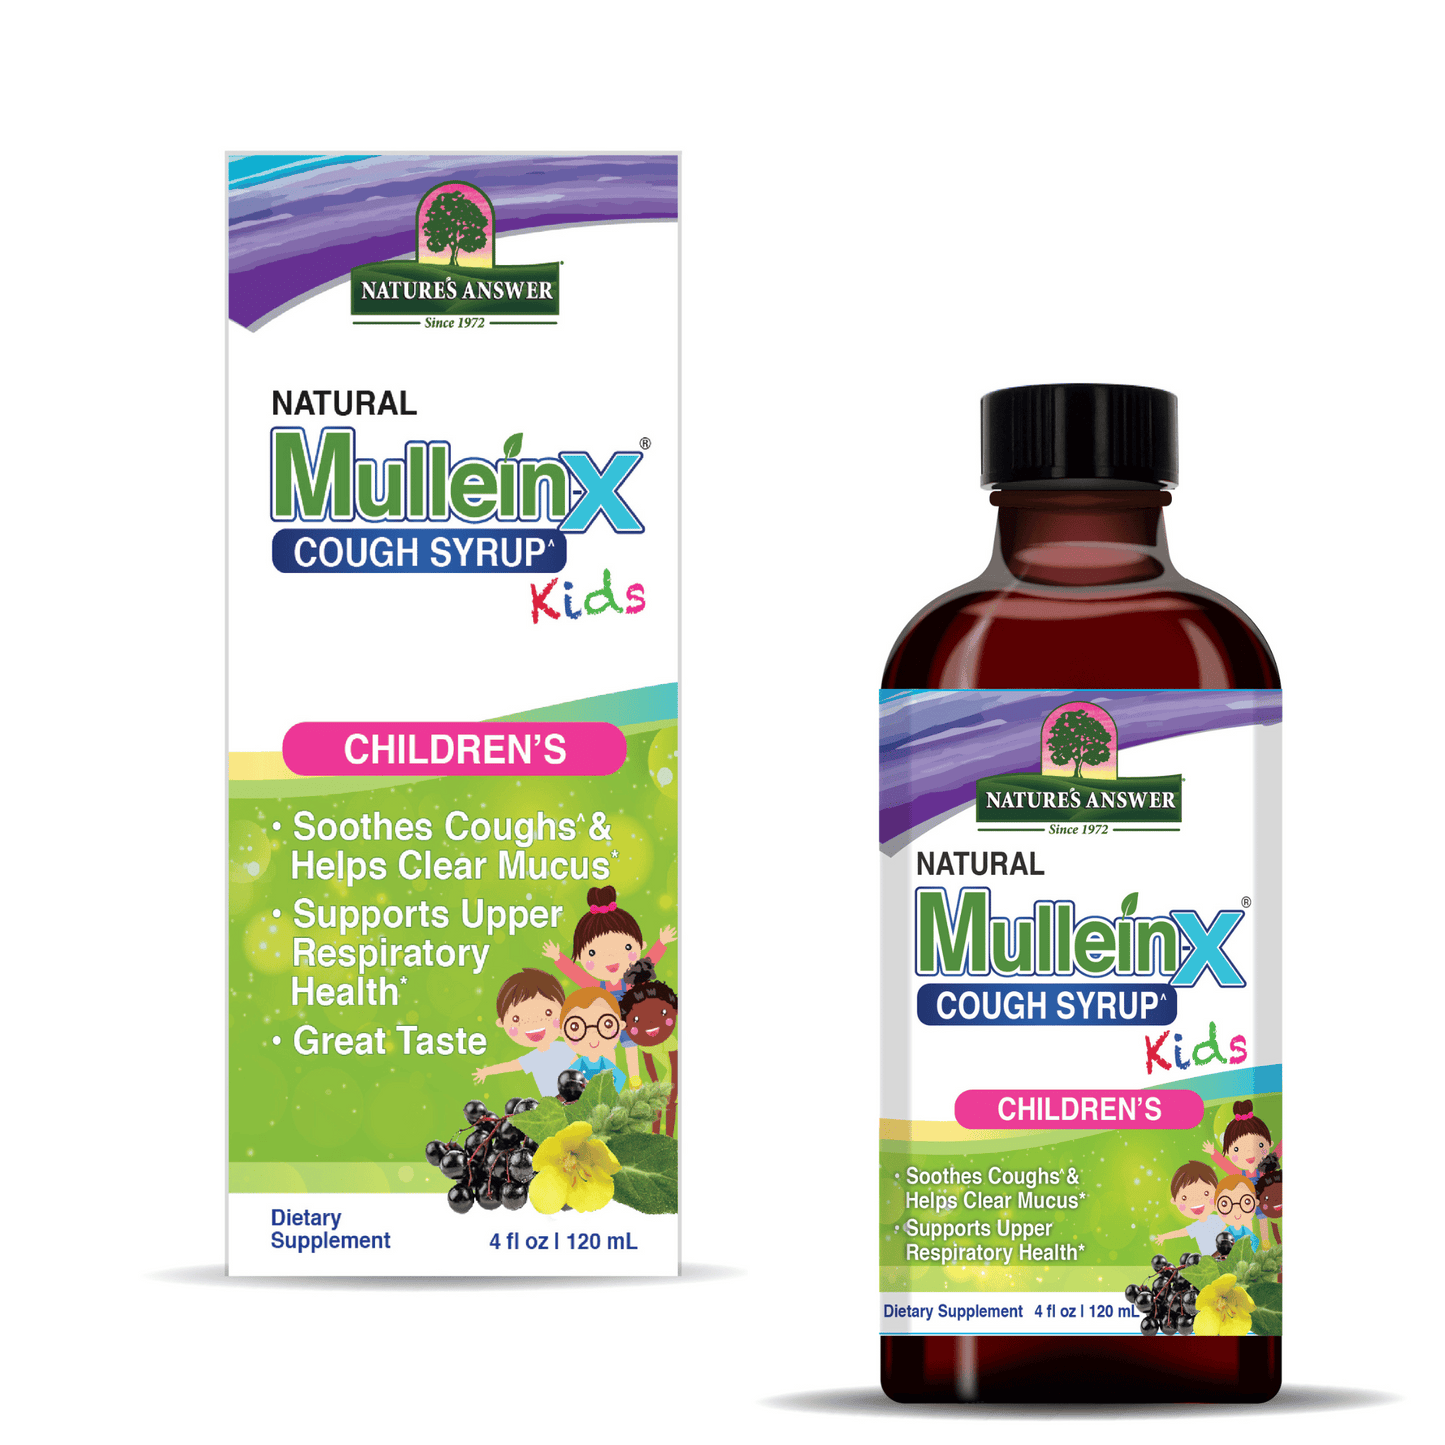 Primary Image of Mullein-X Kids Cough Syrup